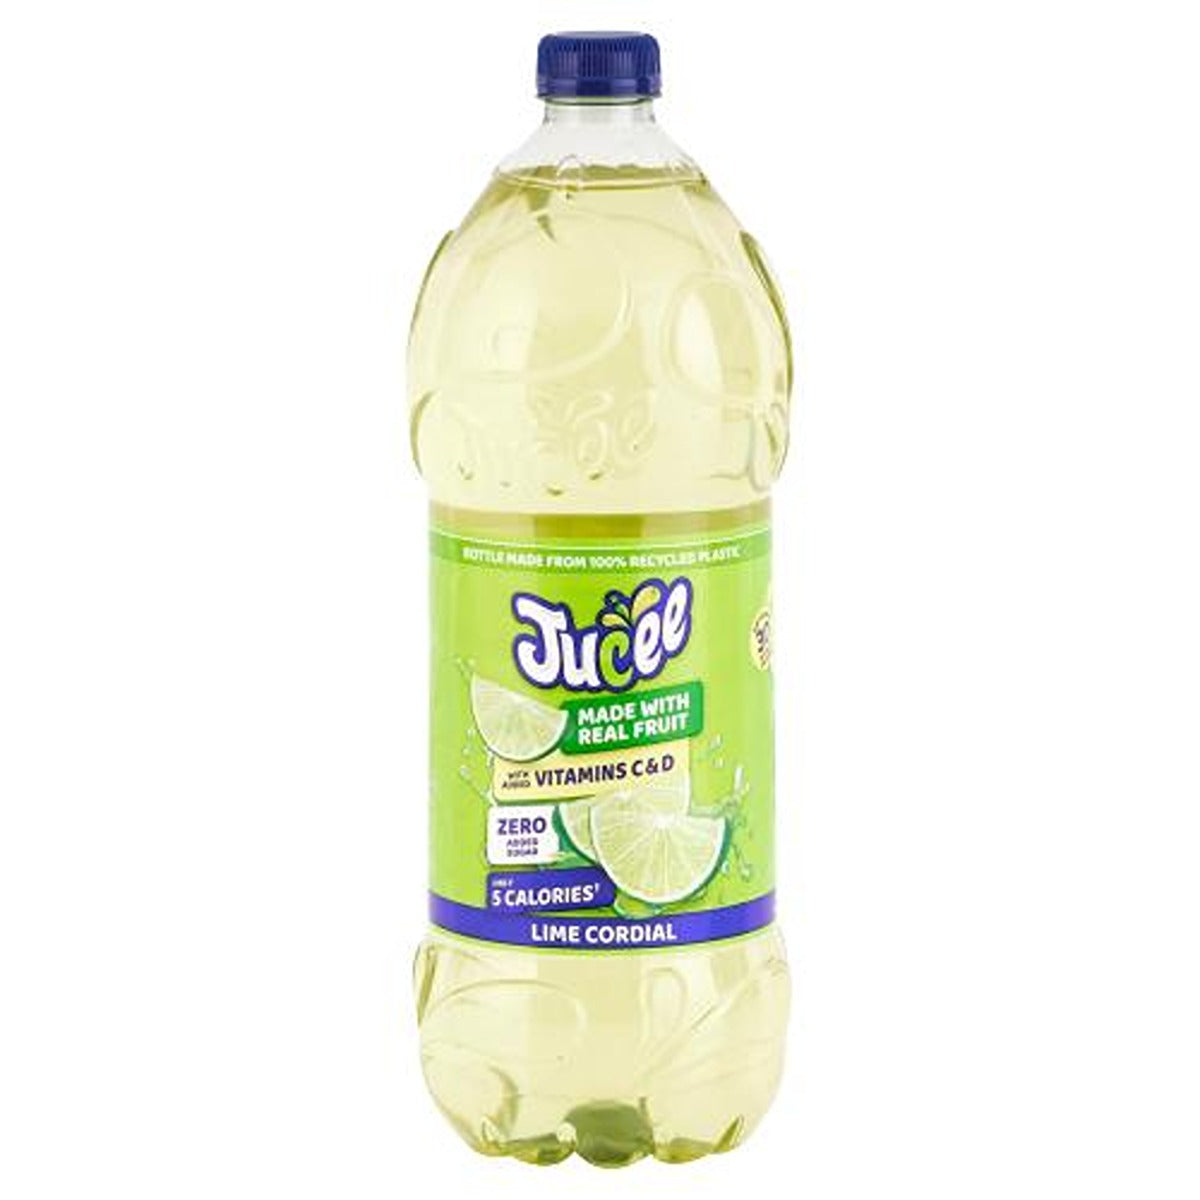 A bottle of Jucee - Zero Added Sugar Lime Cordial - 1.5L on a white background.